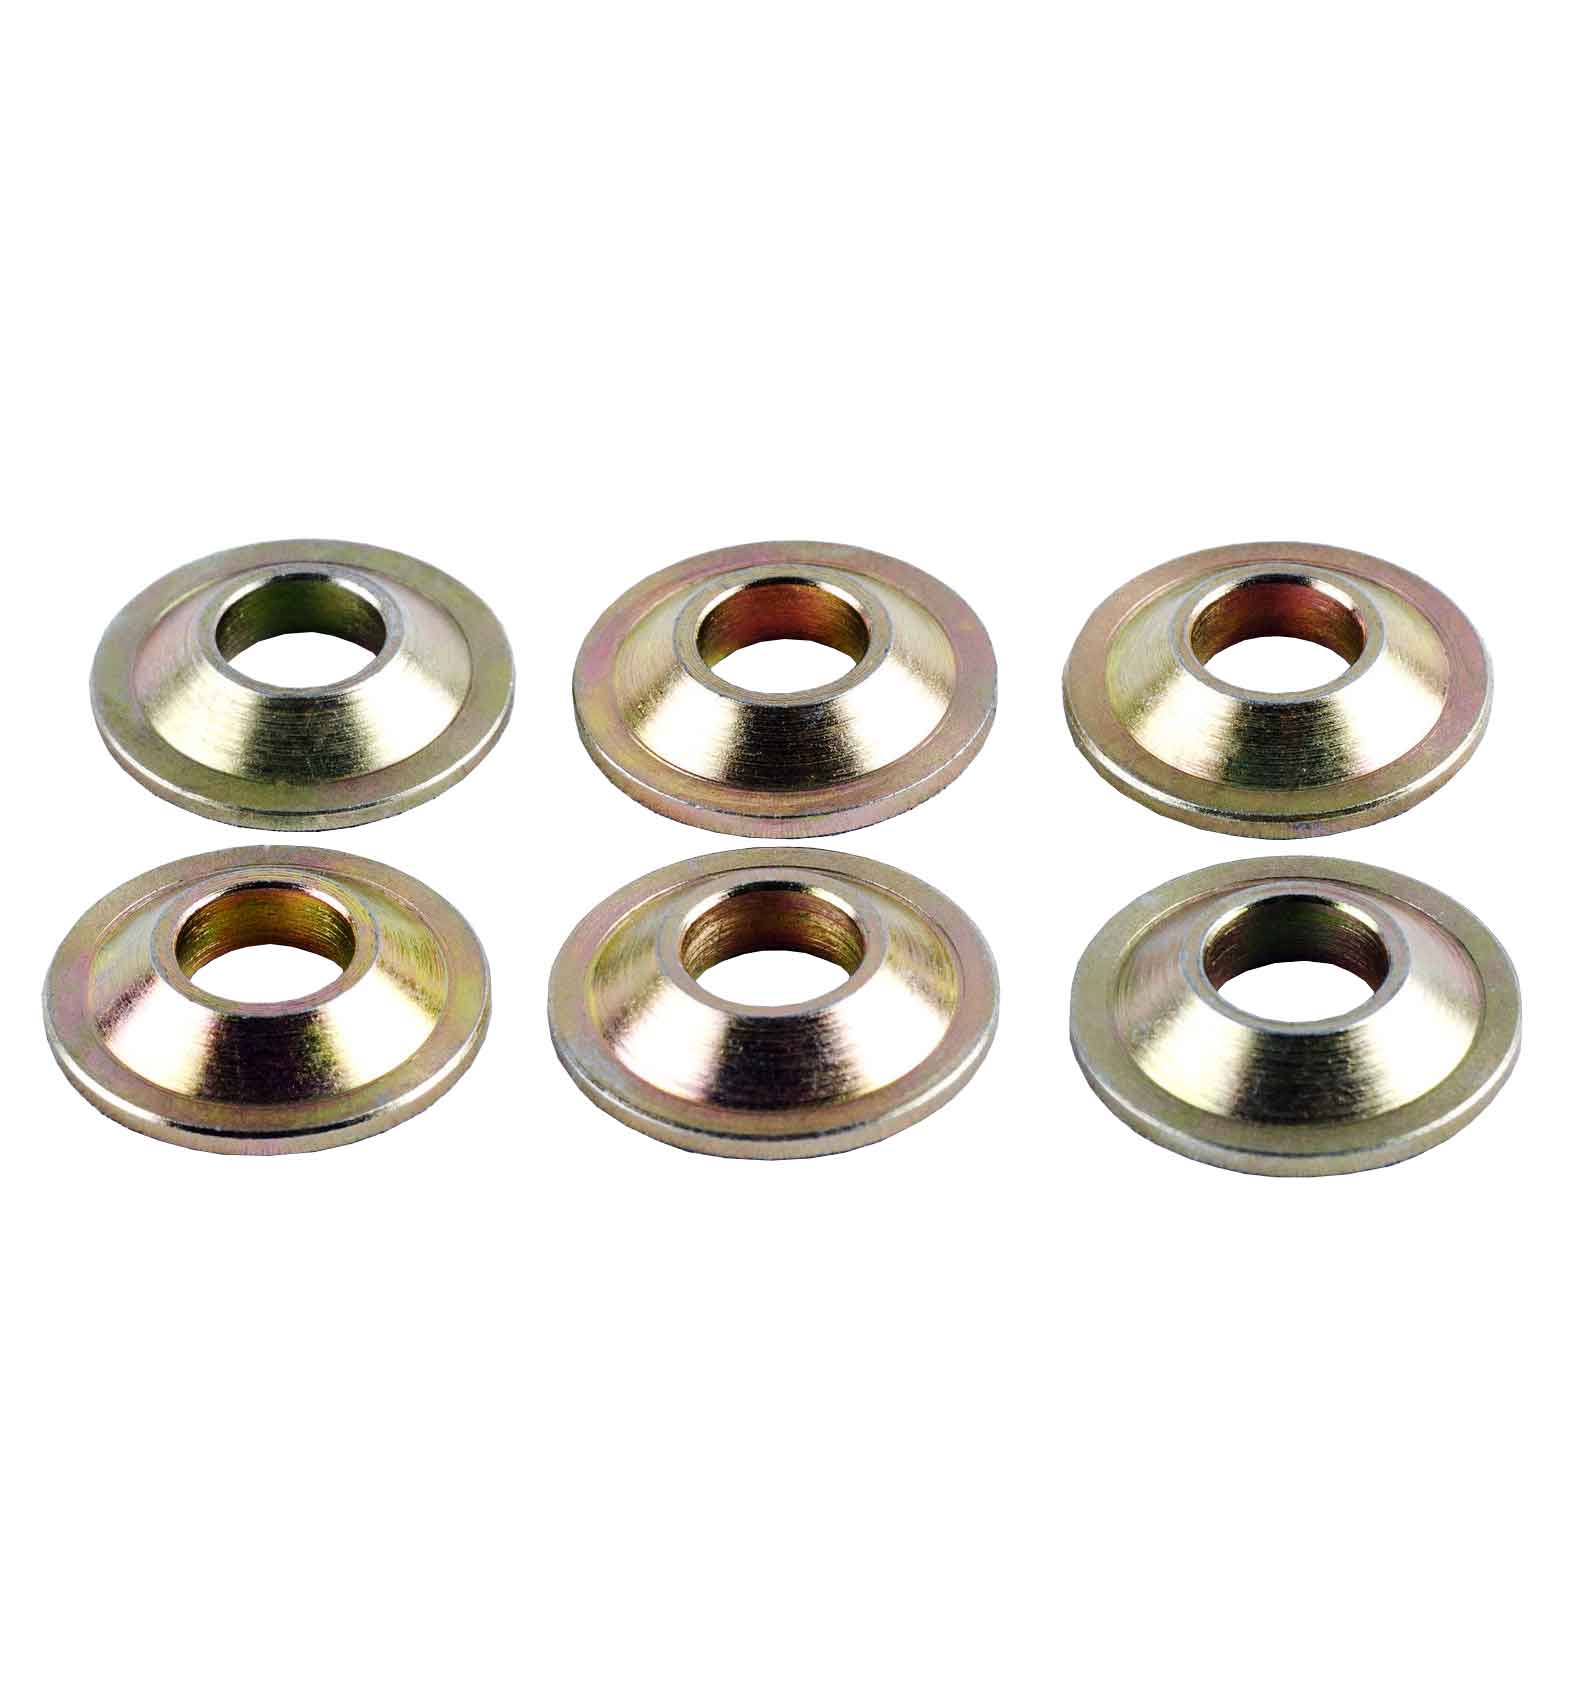 M6 Rod End Misalignment Spacers 6mm (Pack of 6)